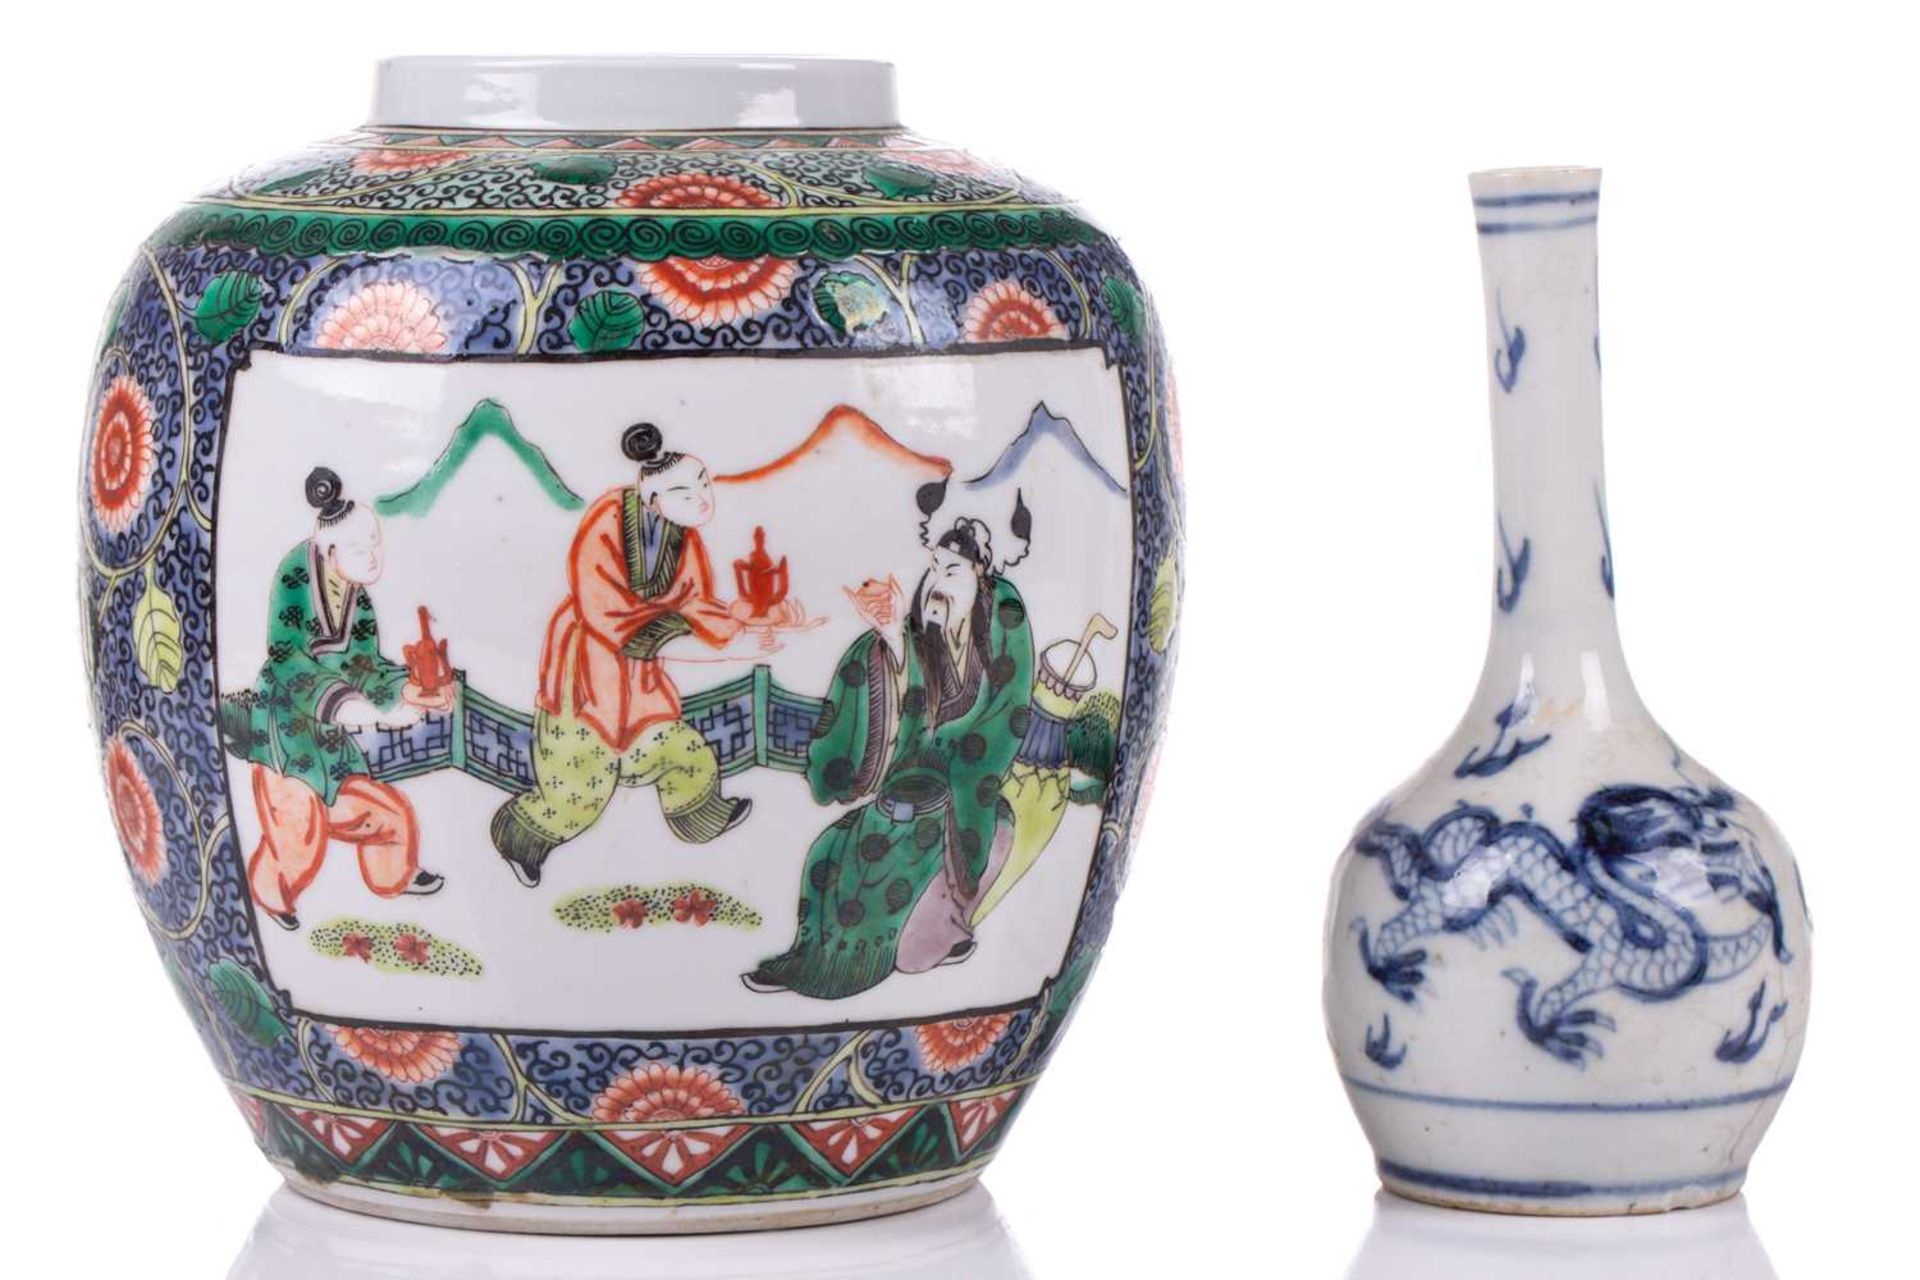 A Chinese porcelain ginger jar, 20th century, painted with panels of figures, within a tight